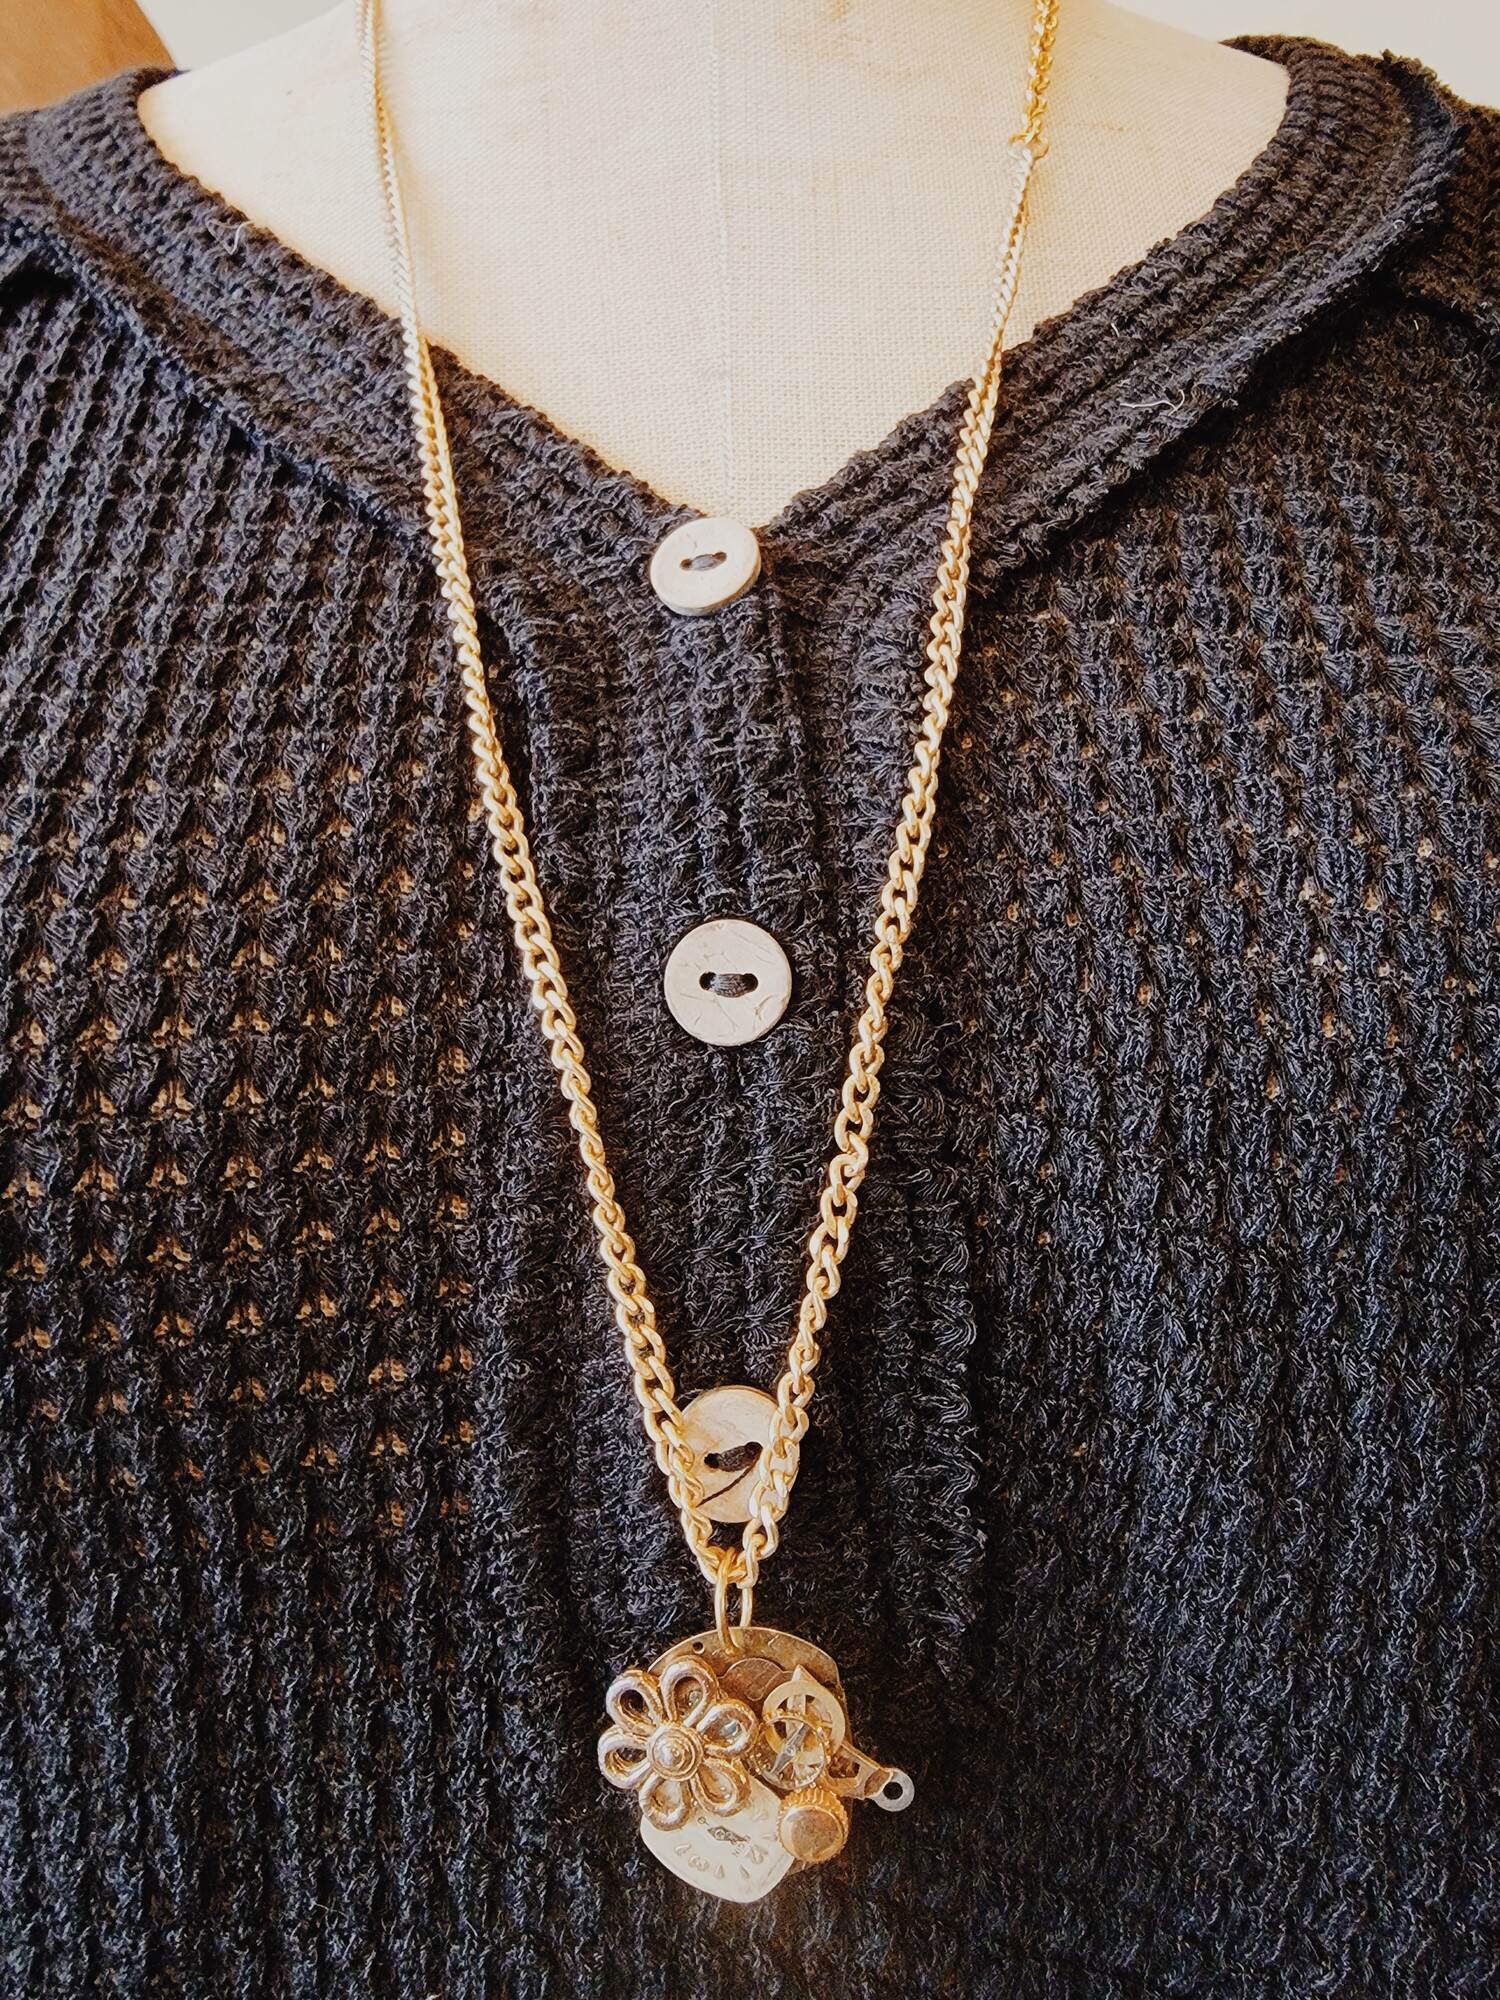 This adorable necklace was hand crafted! The pendant is a collage of different watch faces and parts!
Chain: 30 Inches